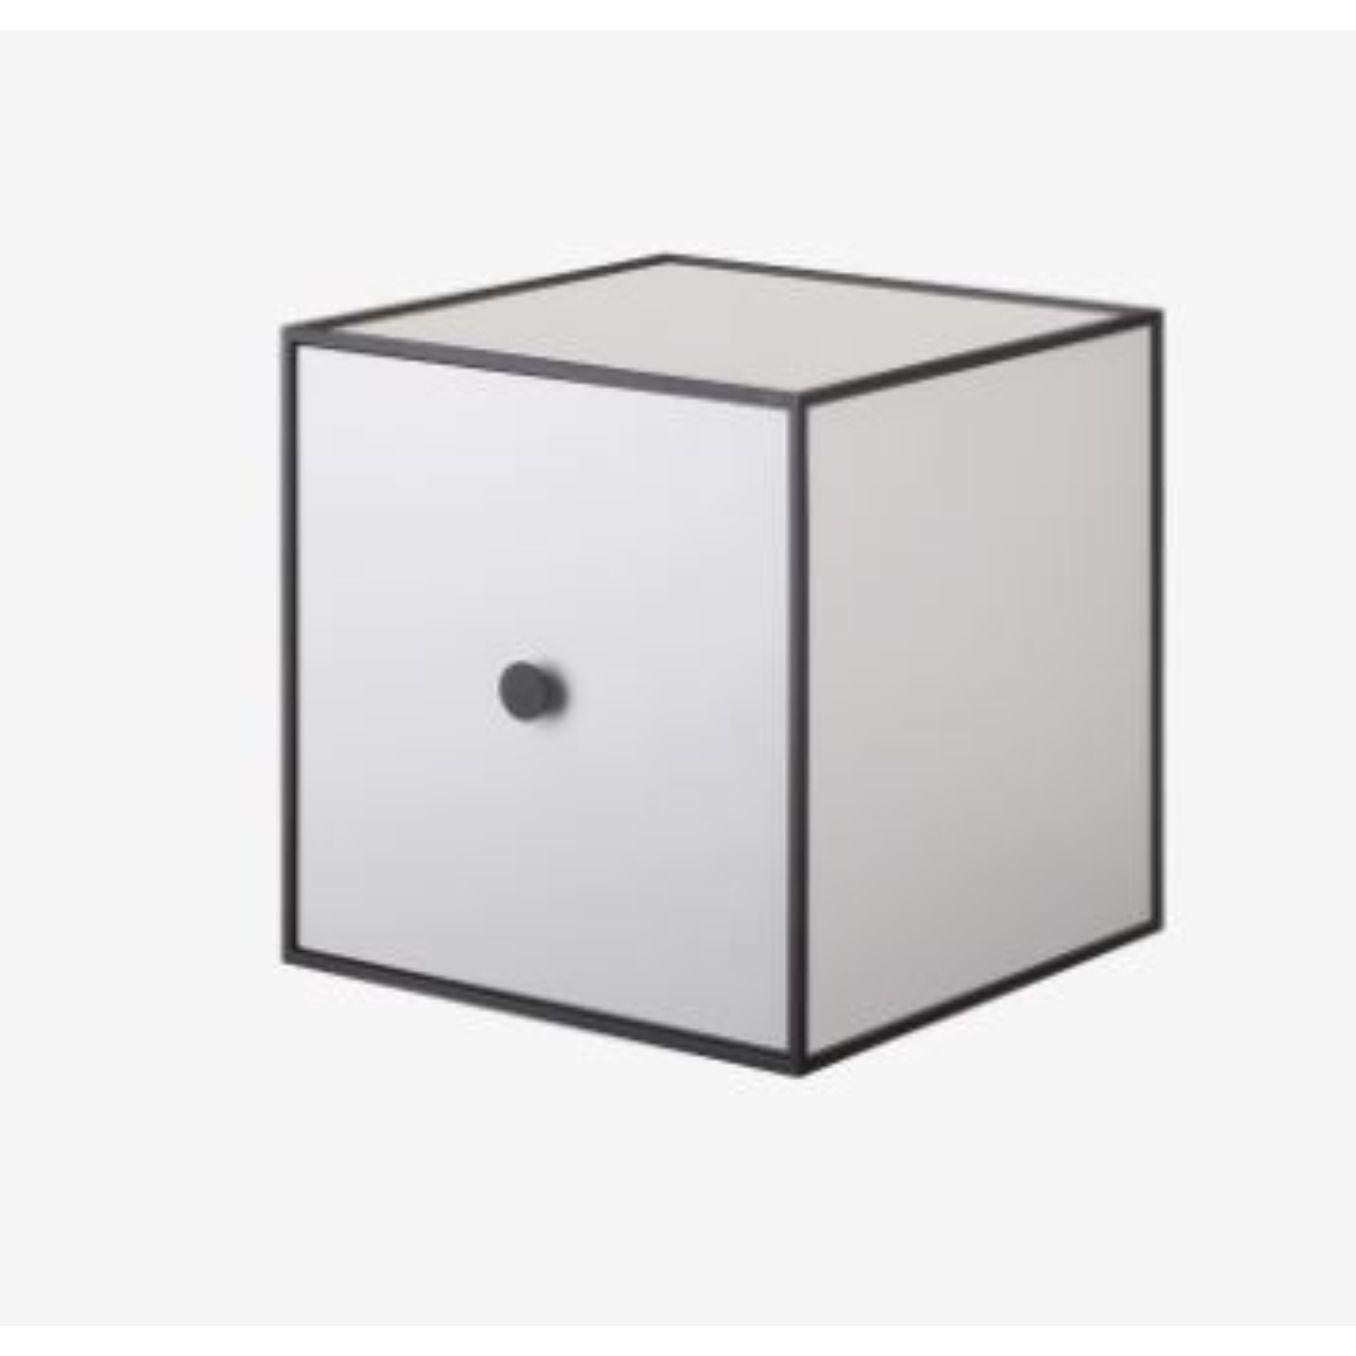 28 light grey frame box with door by Lassen
Dimensions: w 28 x d 28 x h 28 cm 
Materials: Finér, Melamin, Melamin, Melamine, Metal, Veneer
Also available in different colors and dimensions. 

By Lassen is a Danish design brand focused on iconic